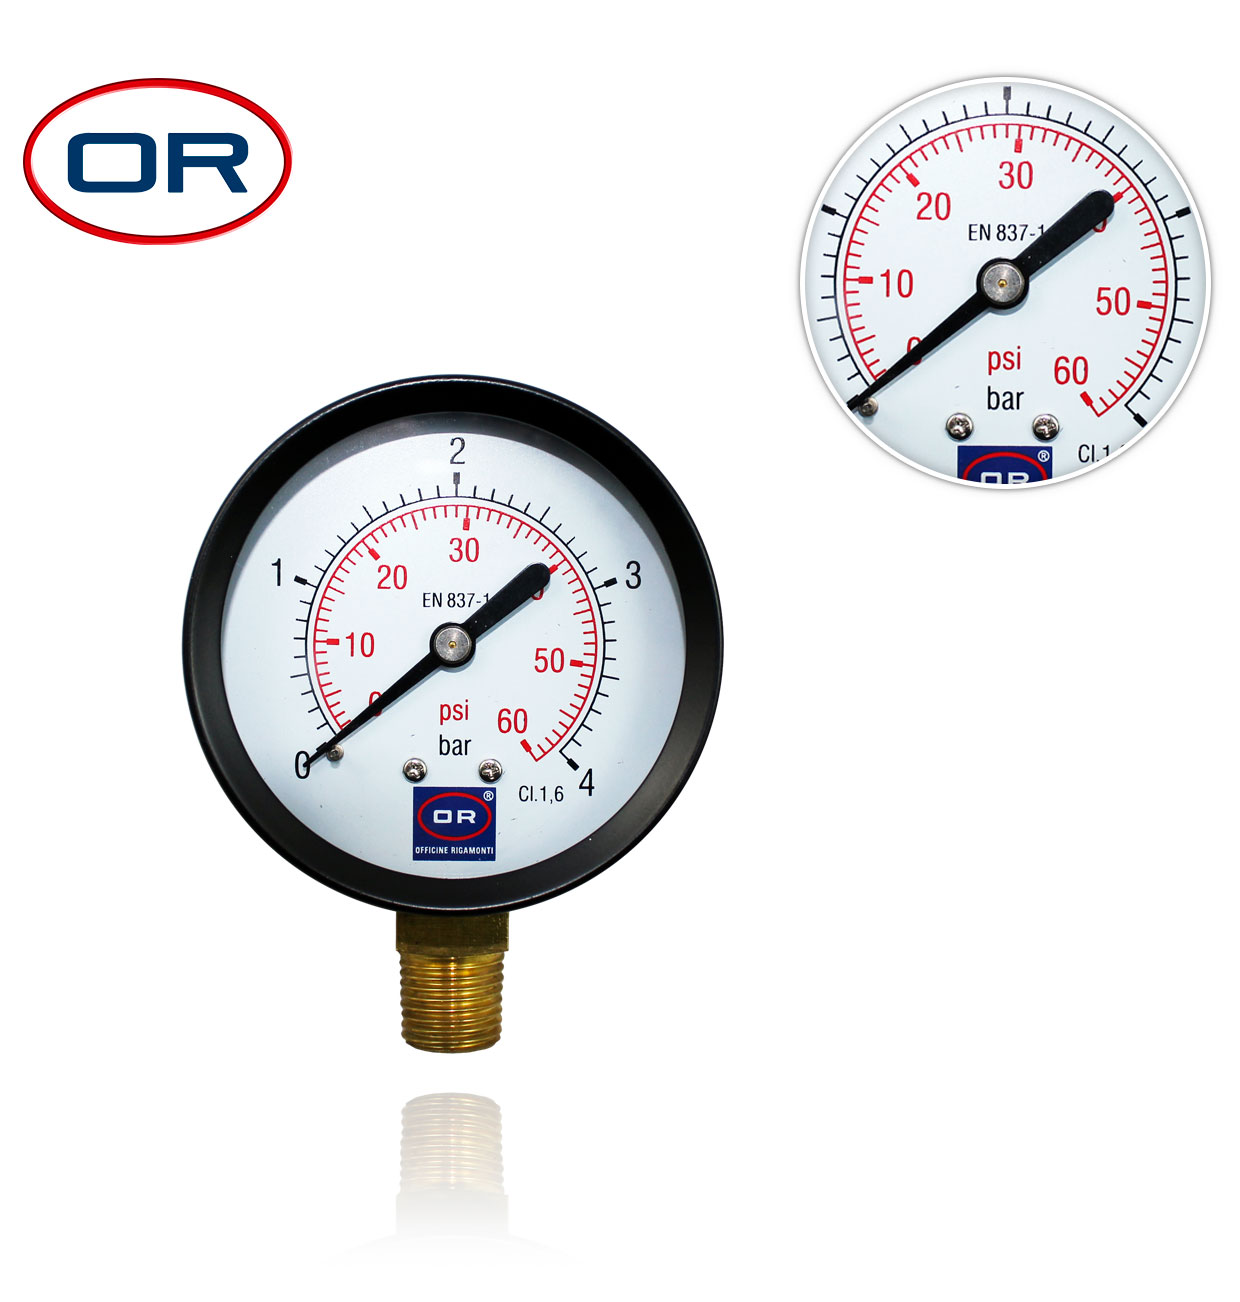 D63 0-4bar R1/4" RADIAL MANOMETER WITH ABS O-RING